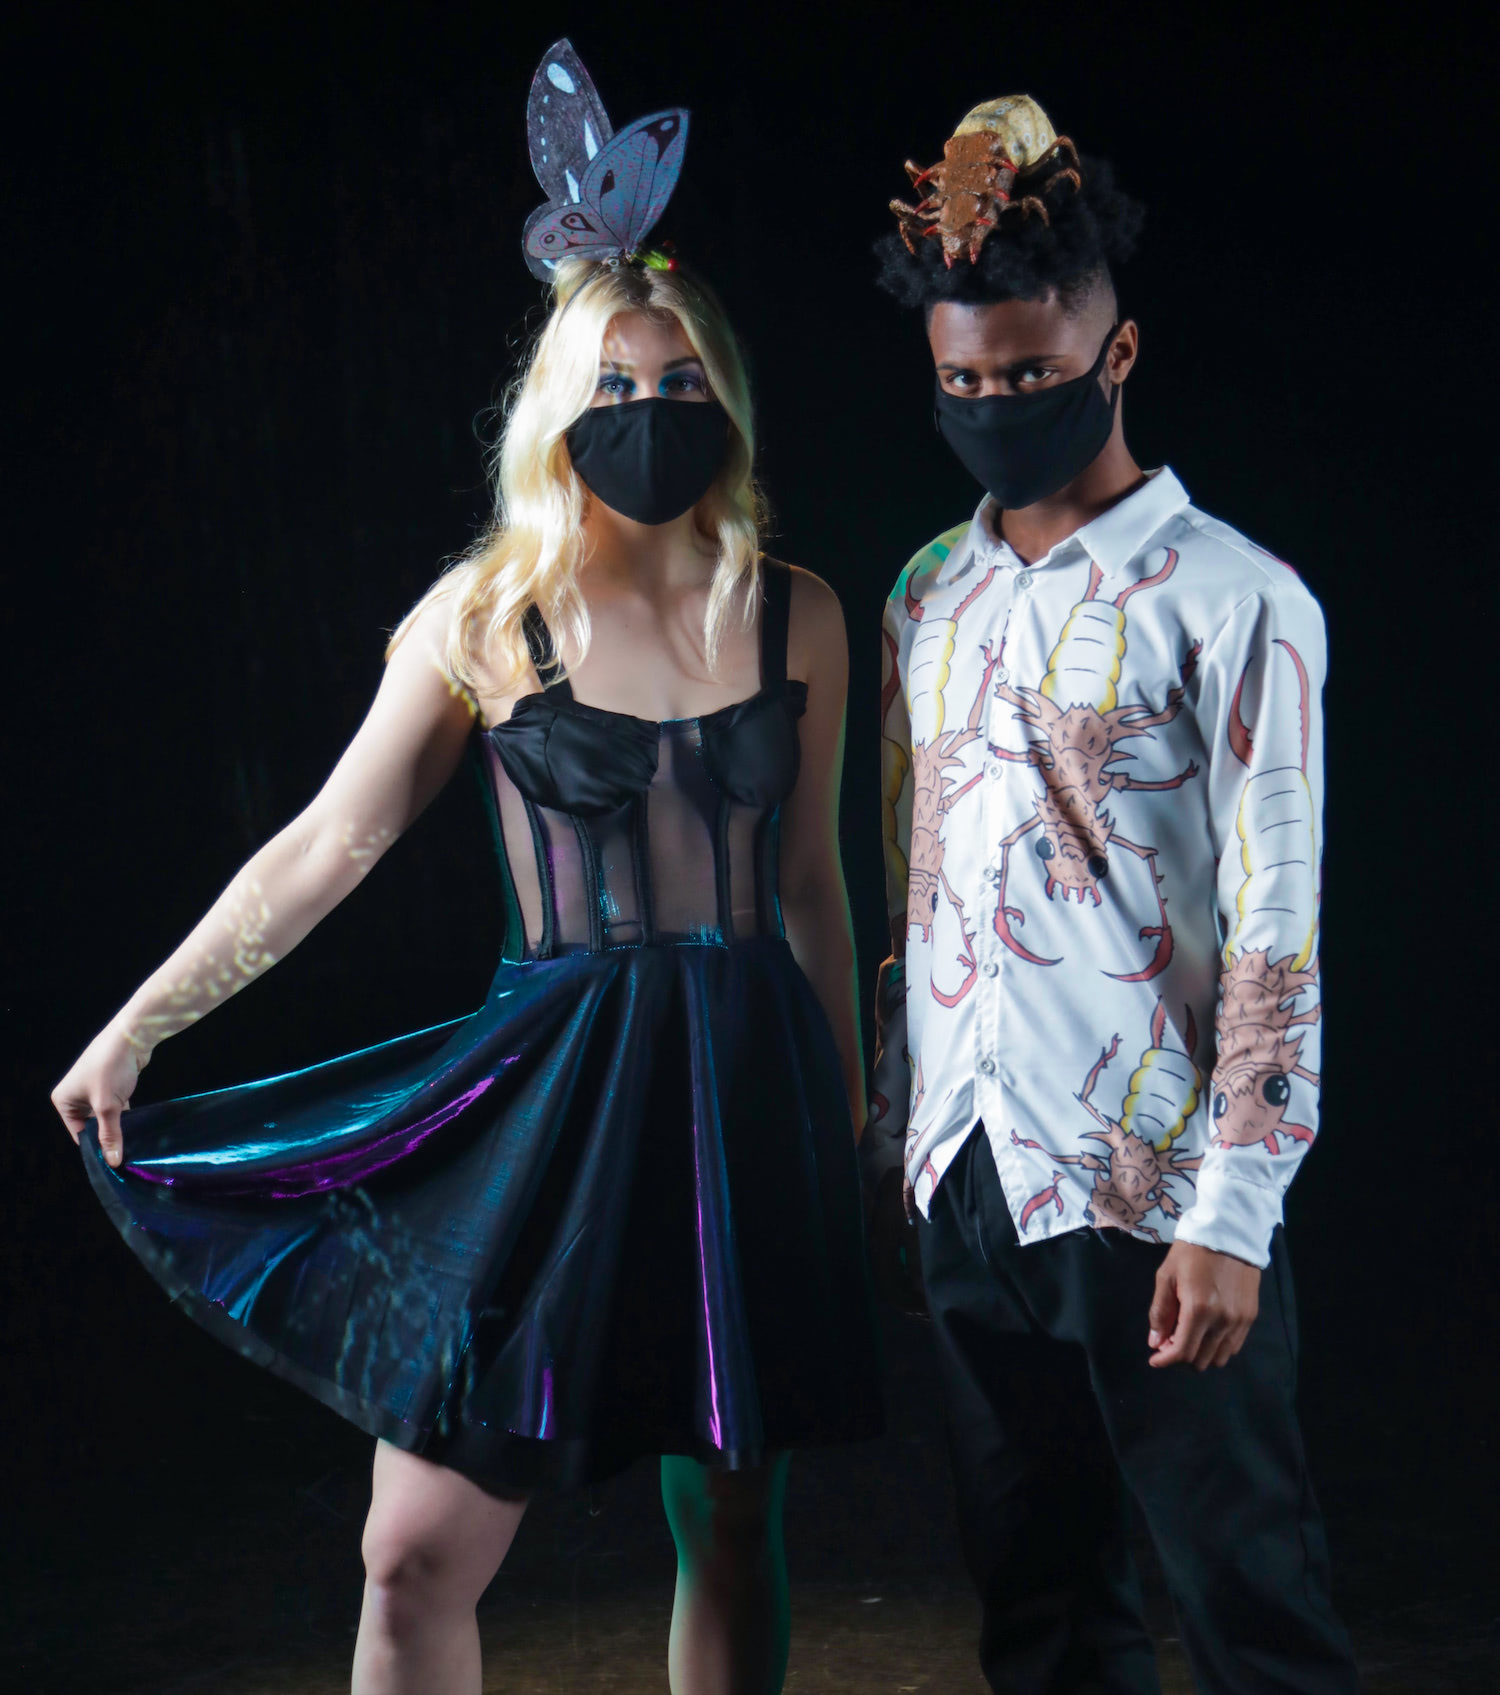 The image depicts the two models next to each other in the full outfits created by the artist. The woman wears a black dress, with purple/blue iridescence, and a crown of a butterfly being eaten. The man has a button up and slacks. The slacks are black with green/blue iridescent pockets. The shirt is white with a large all-over pattern of brown and yellow insects with large claws. He wears a sculpture of one of these insects on his head like a hat.